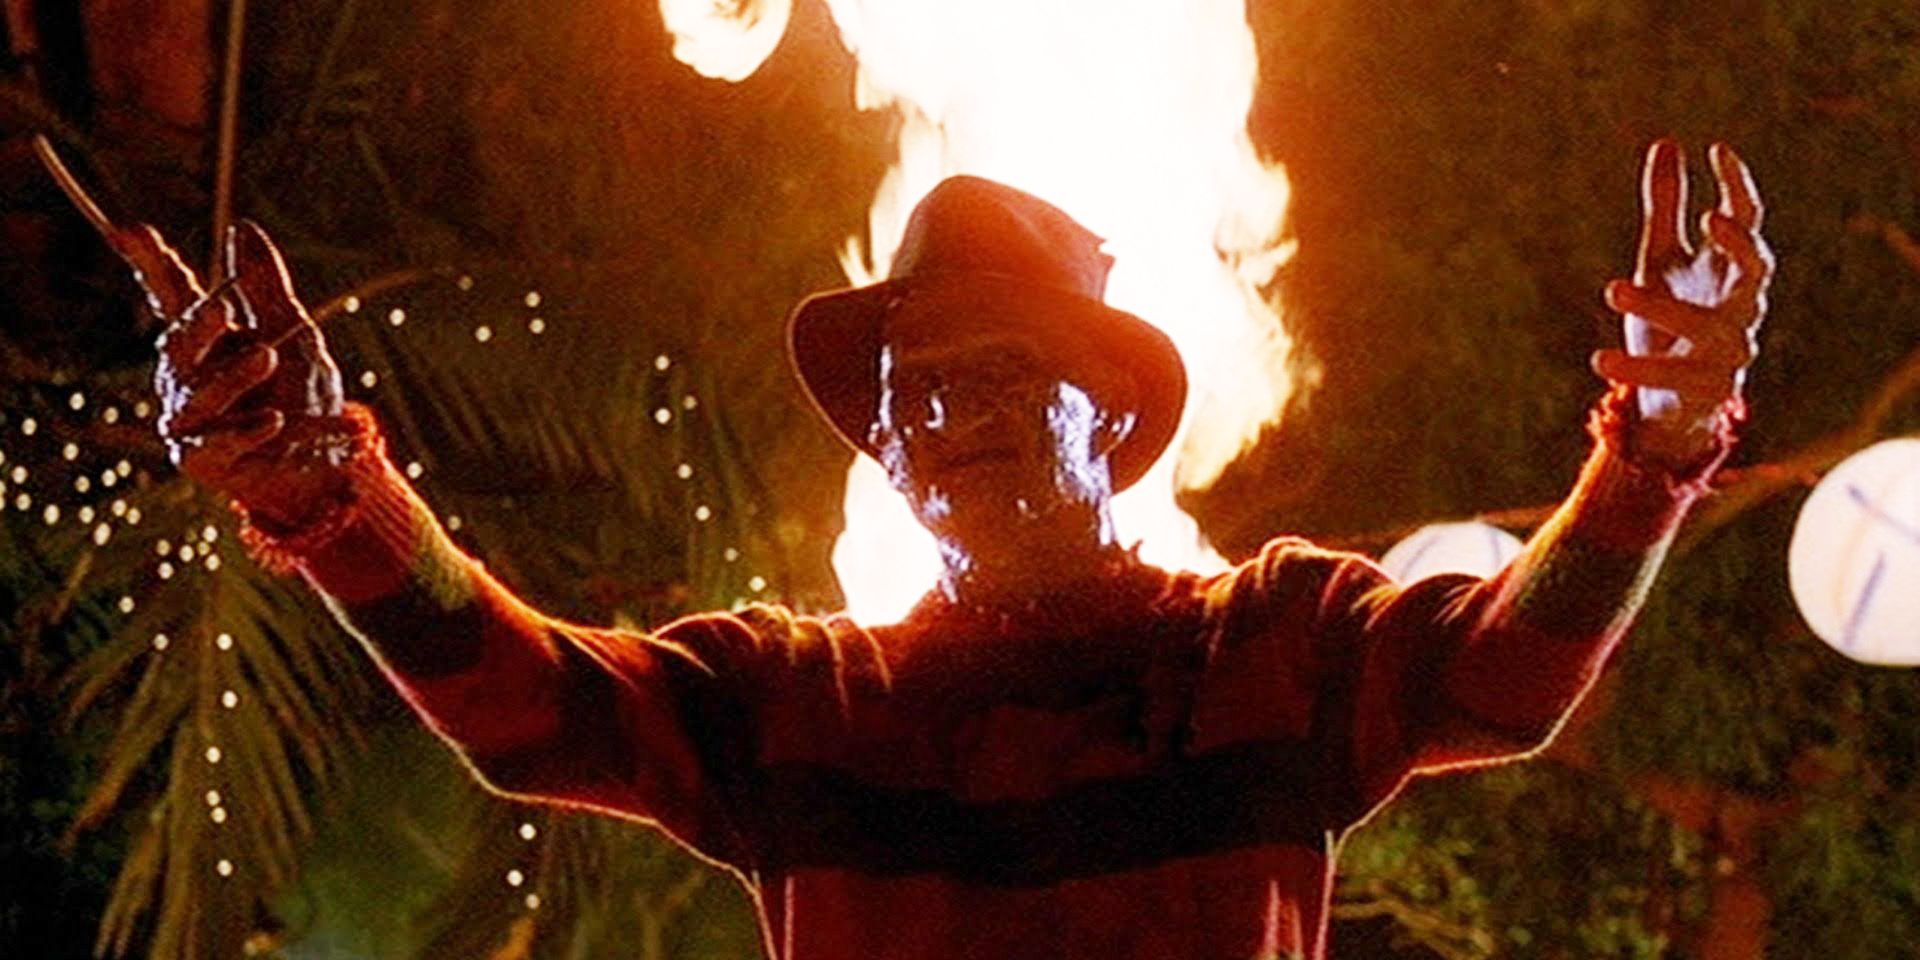 A Nightmare on Elm Street 2 Is Riddled With Freddy Krueger Plot Holes